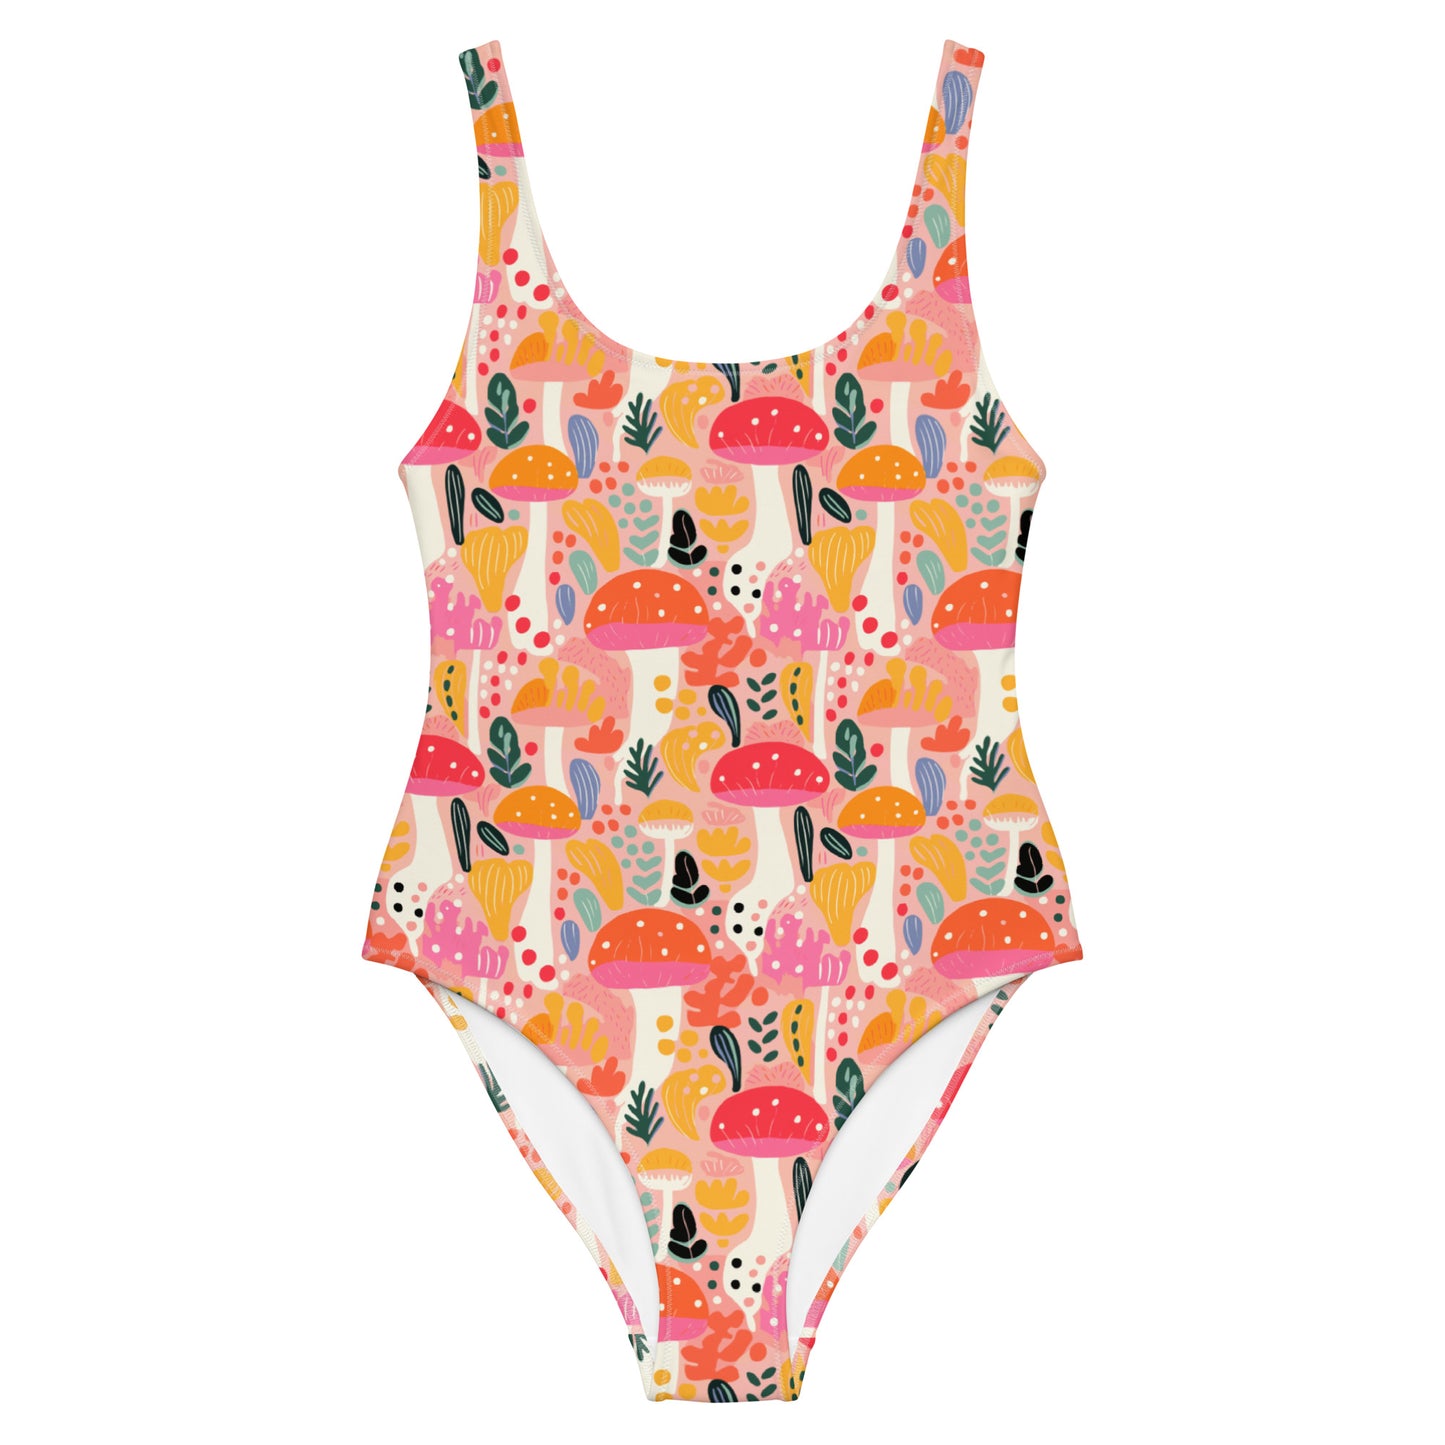 Cotswolds Classic One-Piece Swimsuit